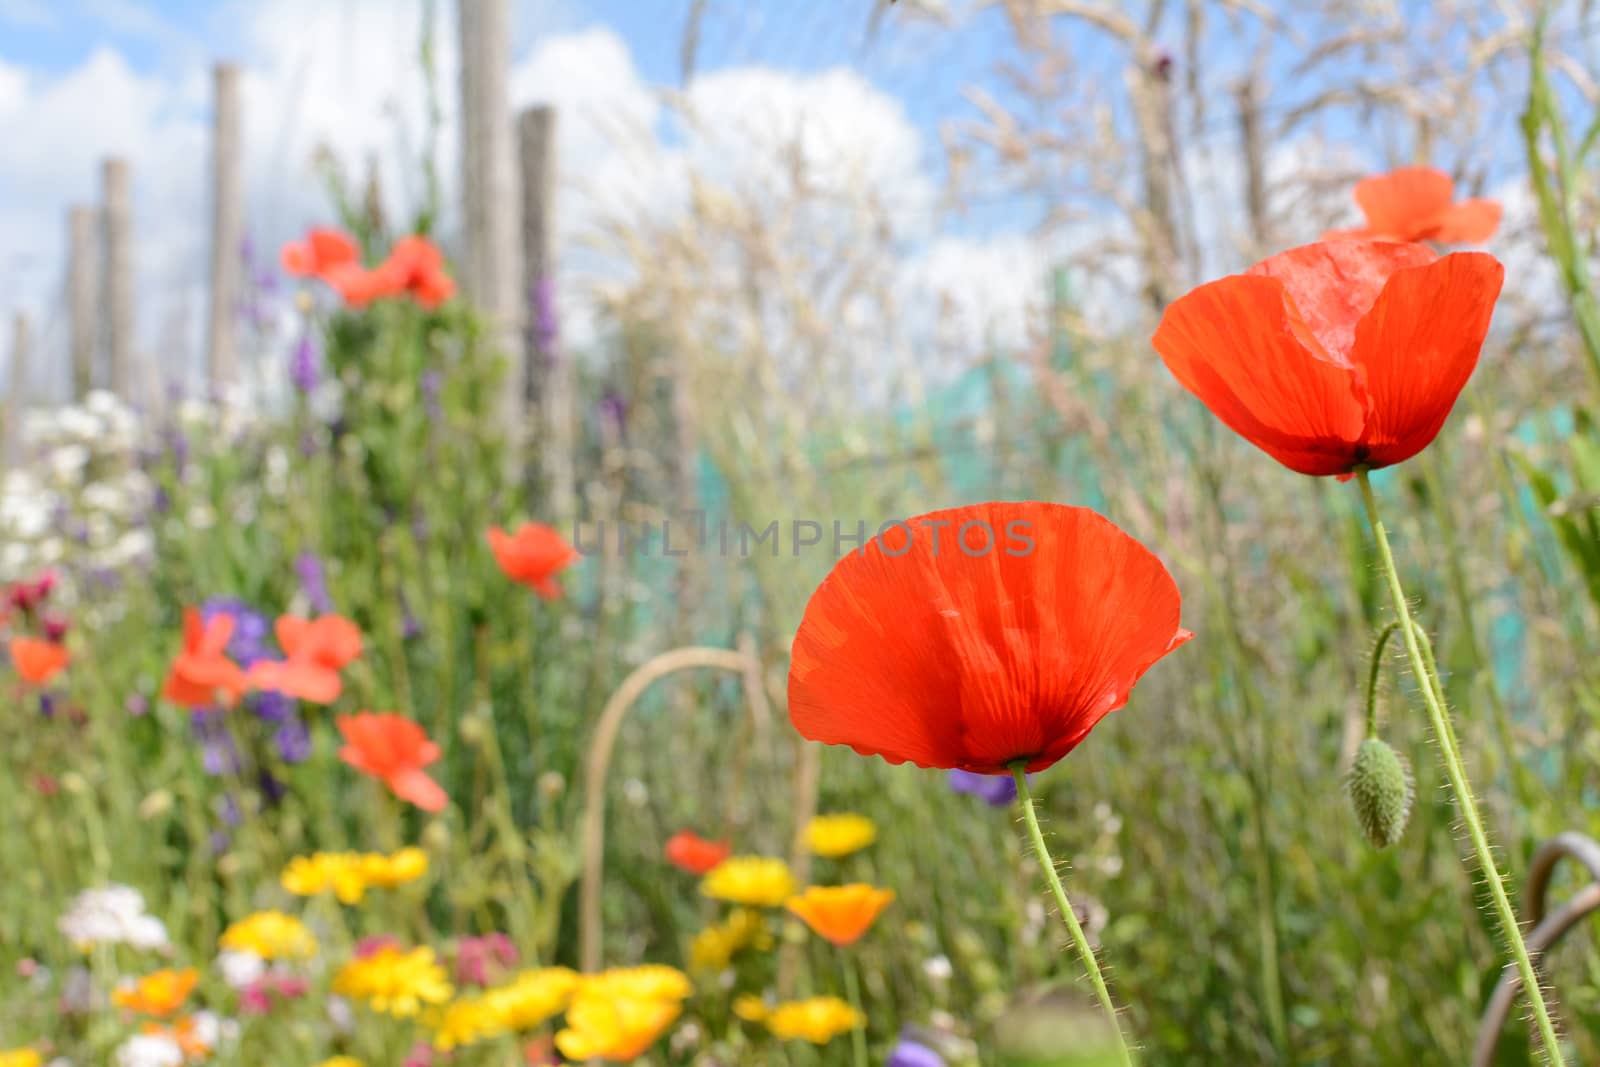 Red corn poppies in selective focus against tall grasses and a colourful flower bed in summer